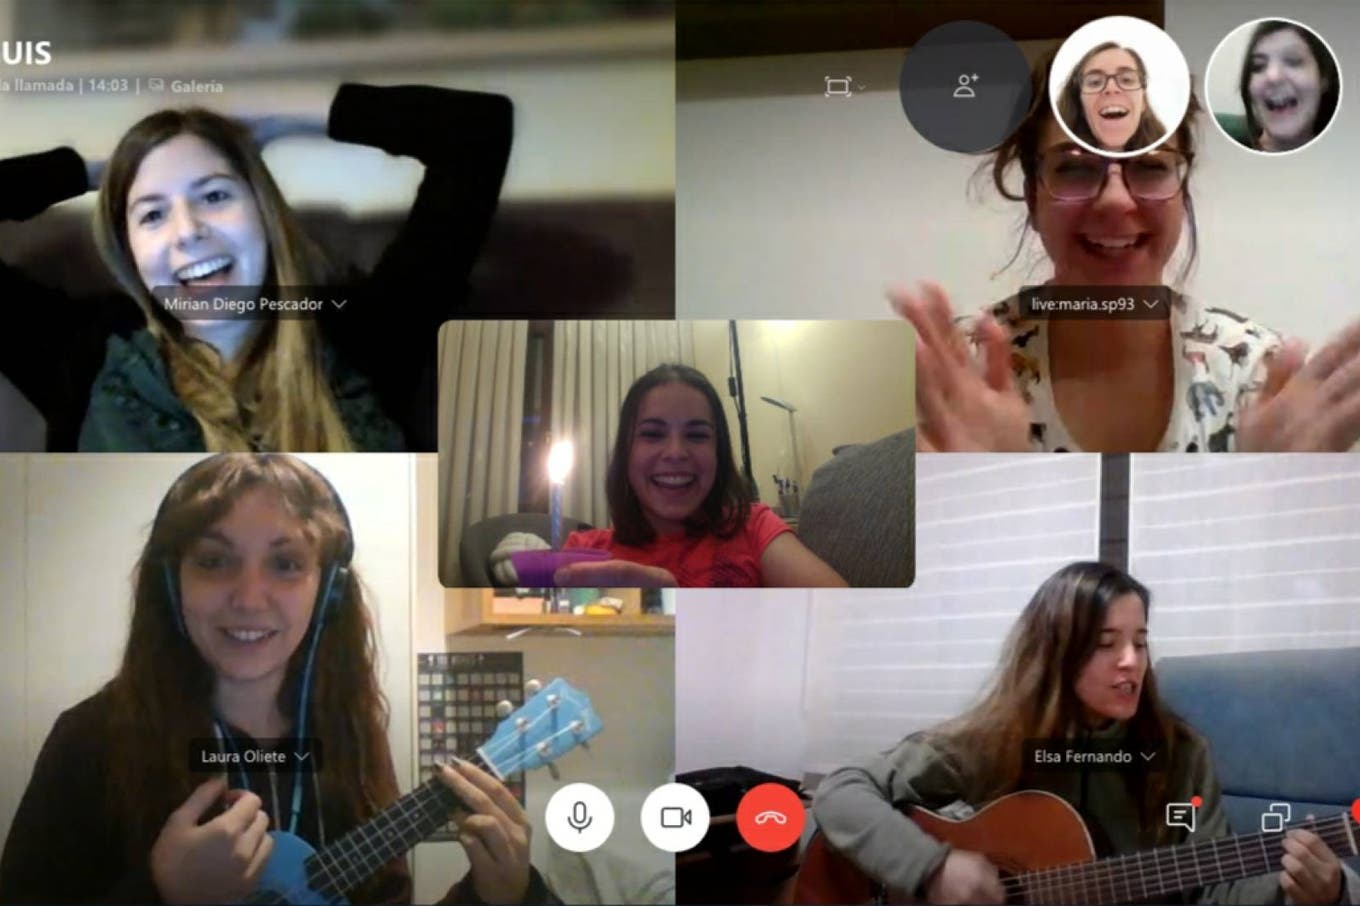 Group video call apps to make quarantine more bearable